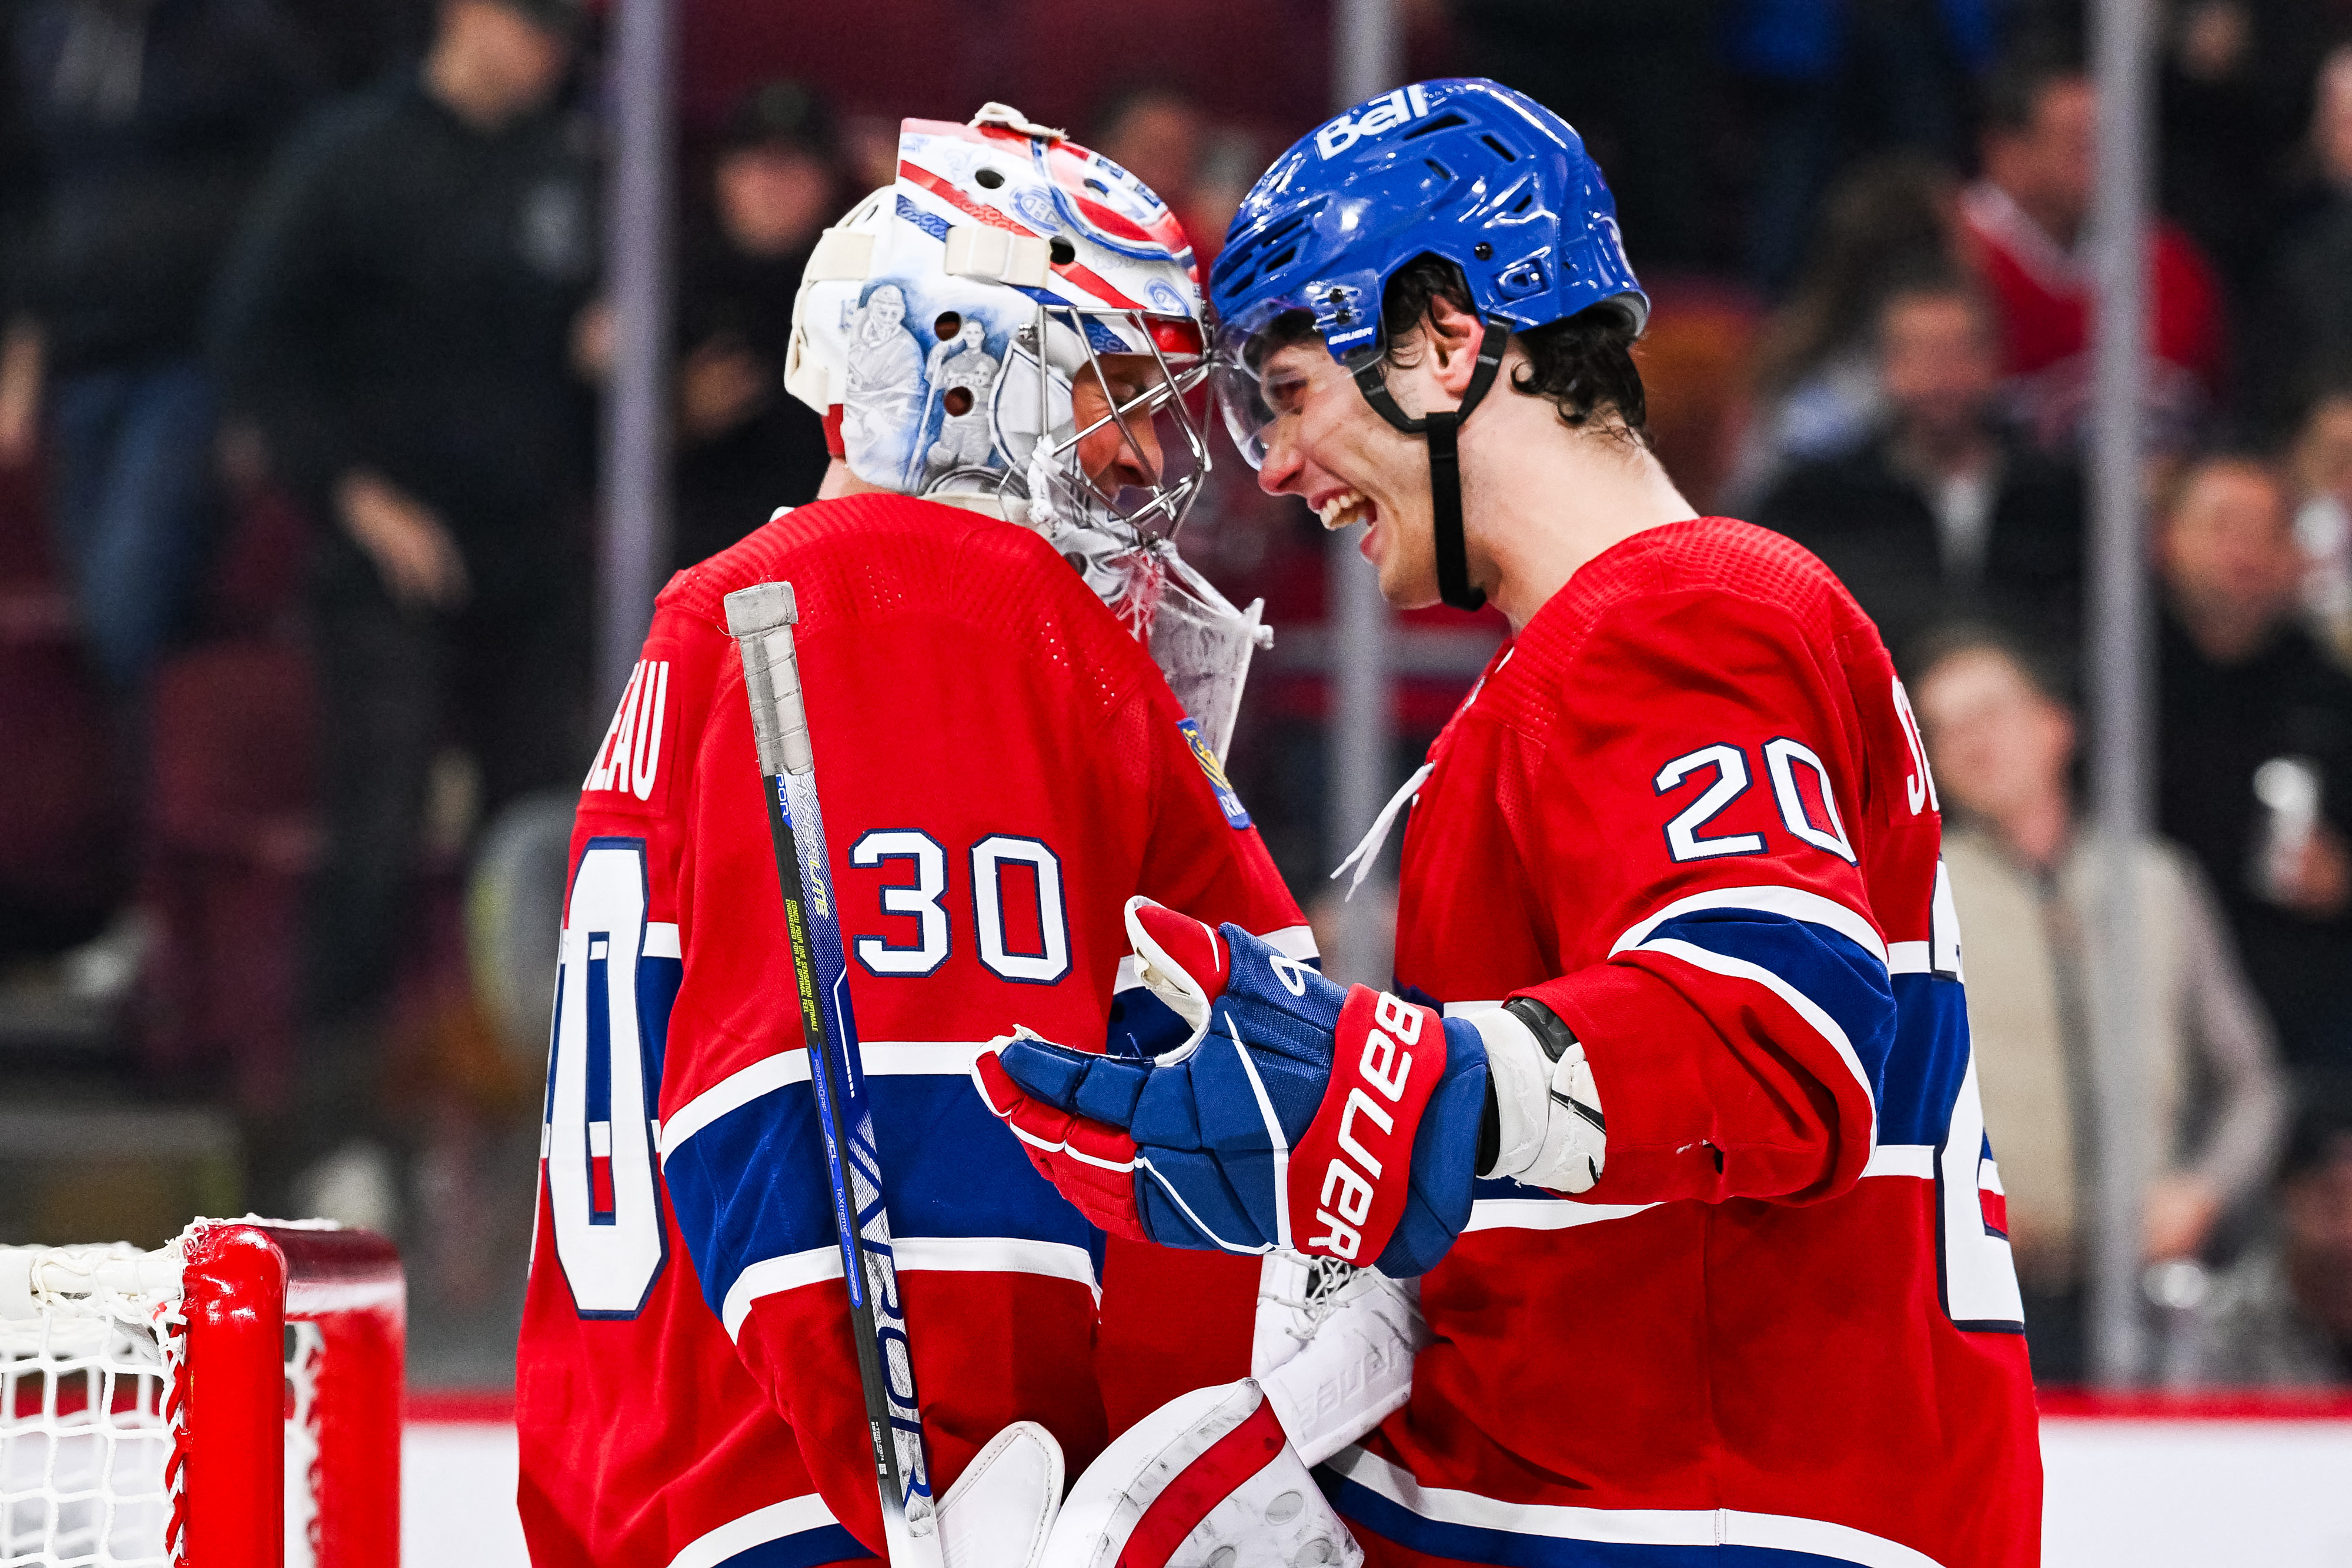 Jarvis' hat trick carries Hurricanes past Canadiens 6-2 - Seattle Sports